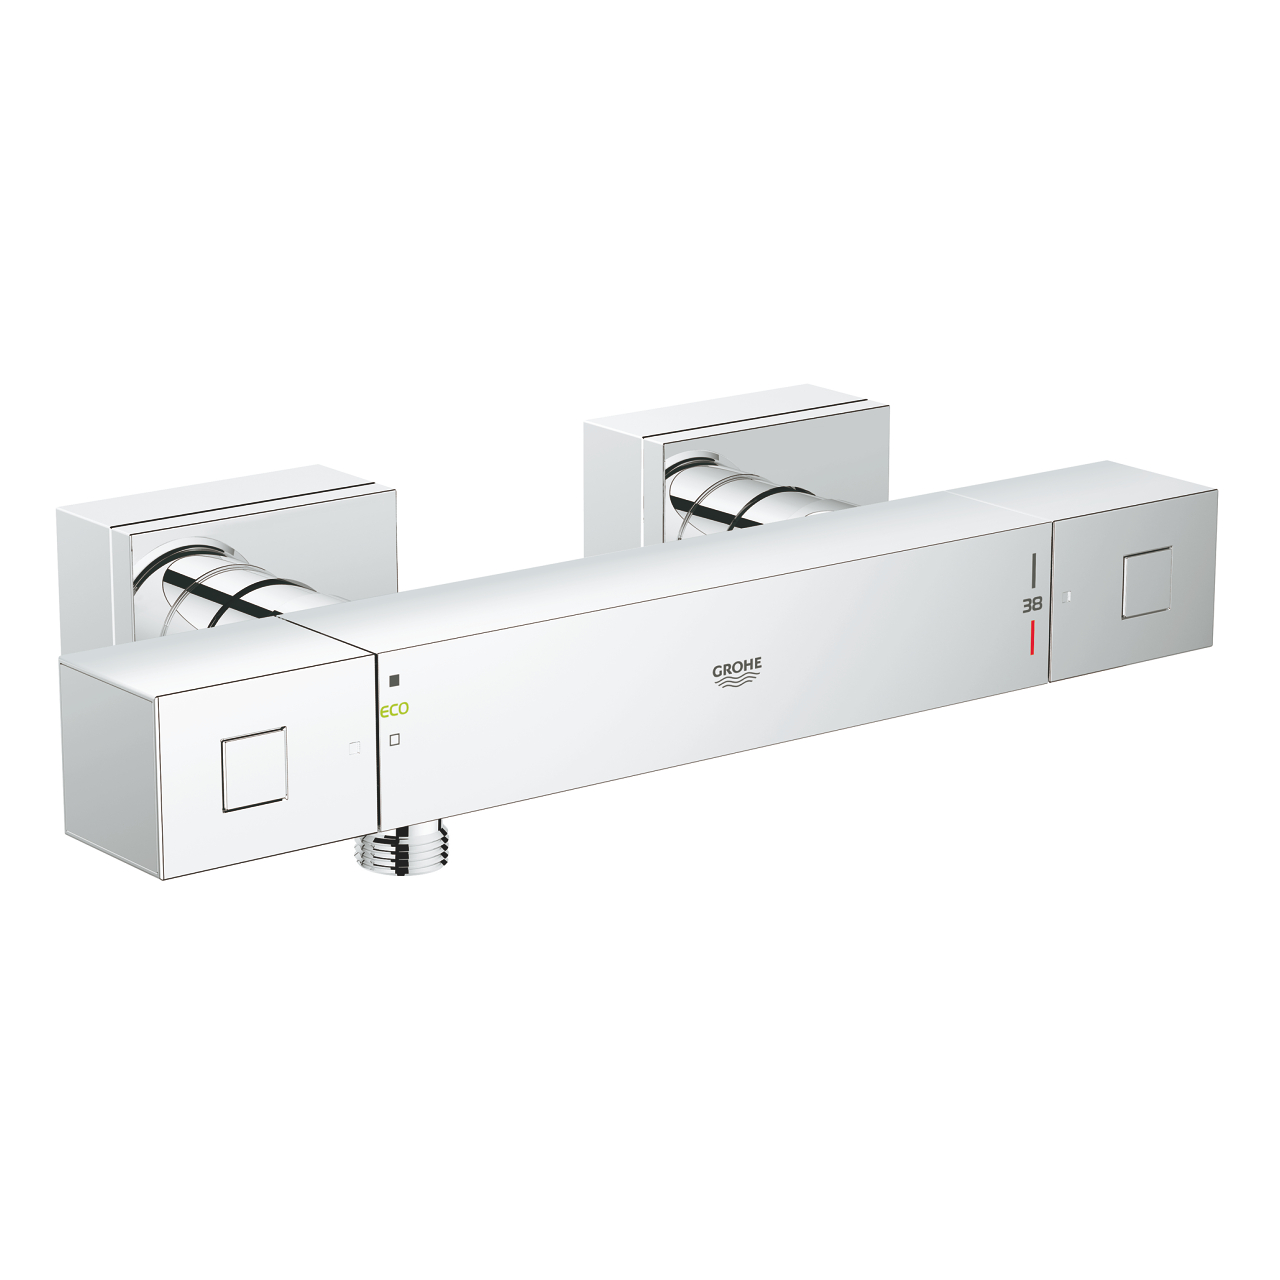 Baterie Dus Termostatata Grohe Grohtherm Cube Crom ( 31.g 34488000.GHR )